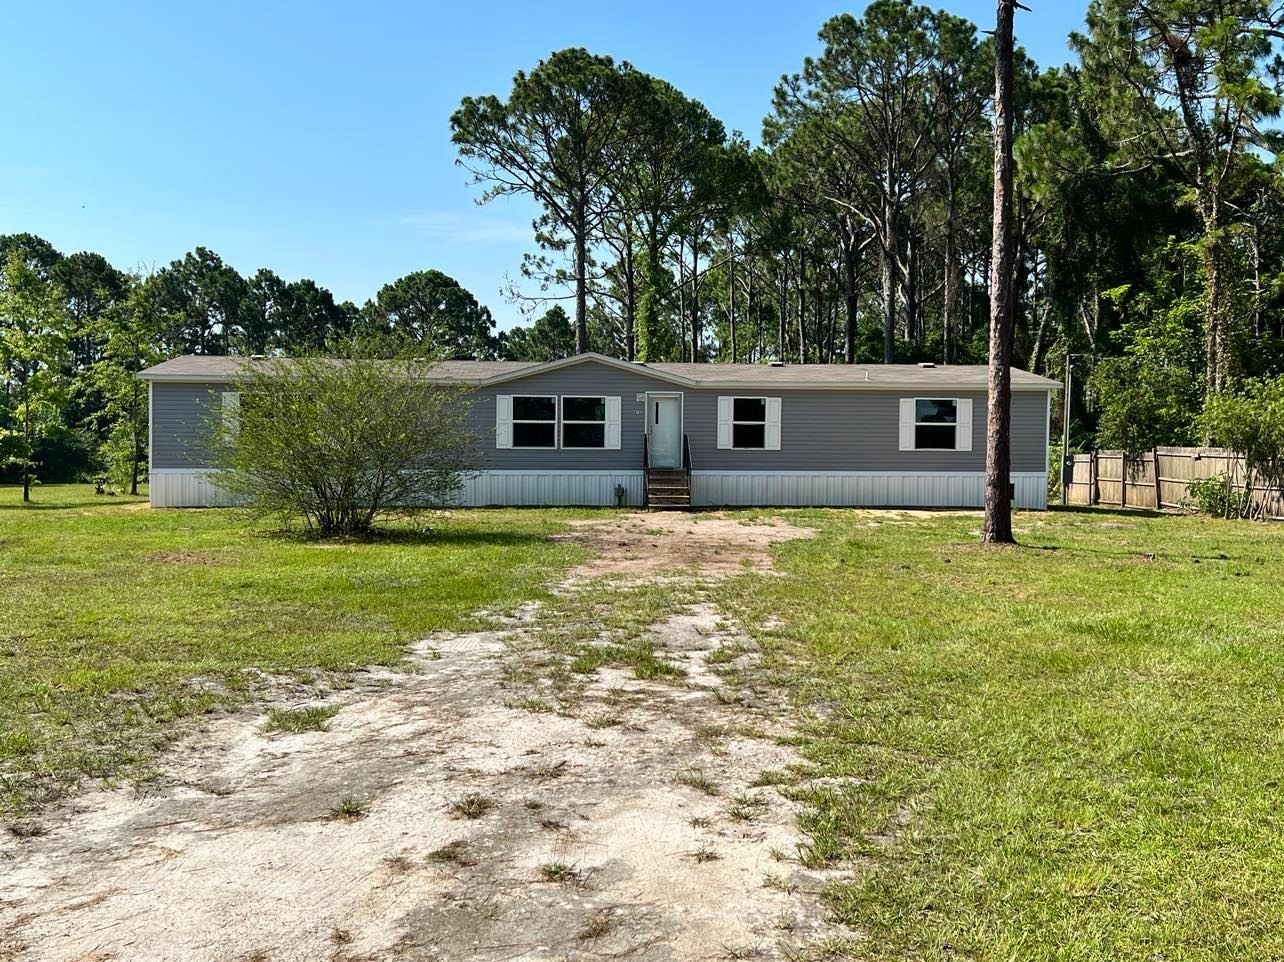 This is a FABULOUS 2020 mobile home situated on 1 acre of land in Eastpoint, Florida.  Located in Franklin County.  5 bedrooms, 3 bath - this place is HUGE! Turn-key, move in ready! Recent restoration cleaned for that "like brand new" feeling!  All the rooms are spacious with ample closet space.  All 3 bathrooms are full baths!